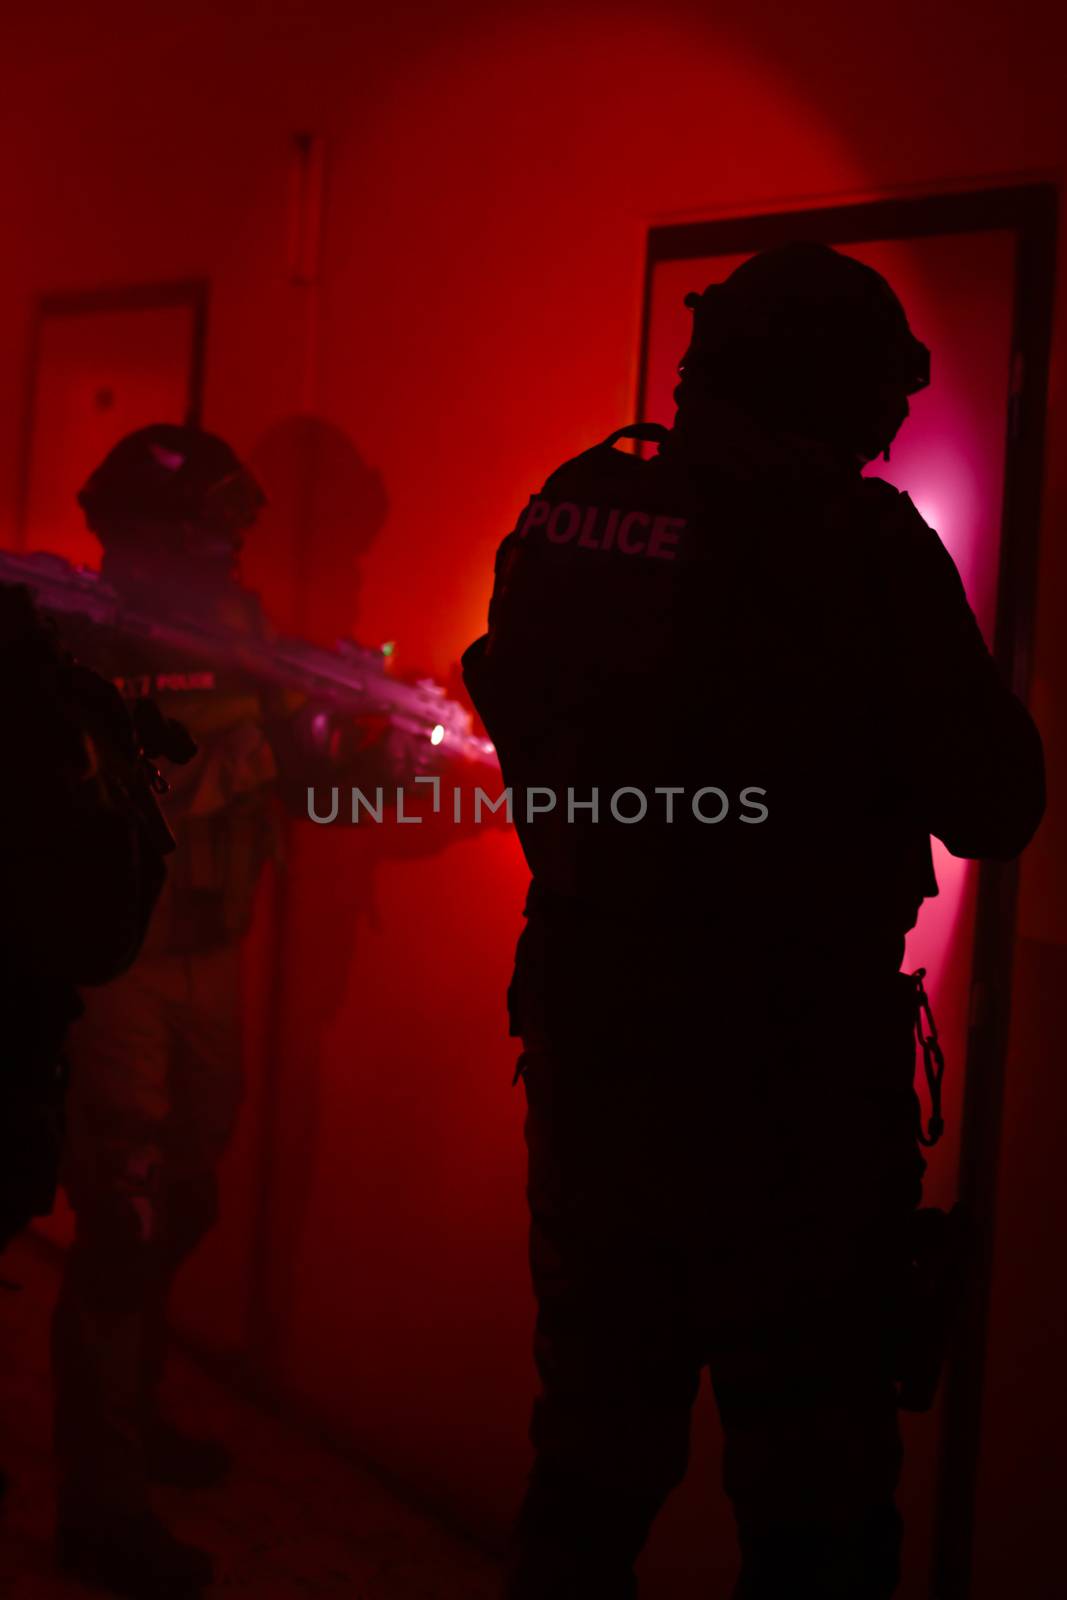 A special police unit during the liberation of the hostages from the building by Edophoto